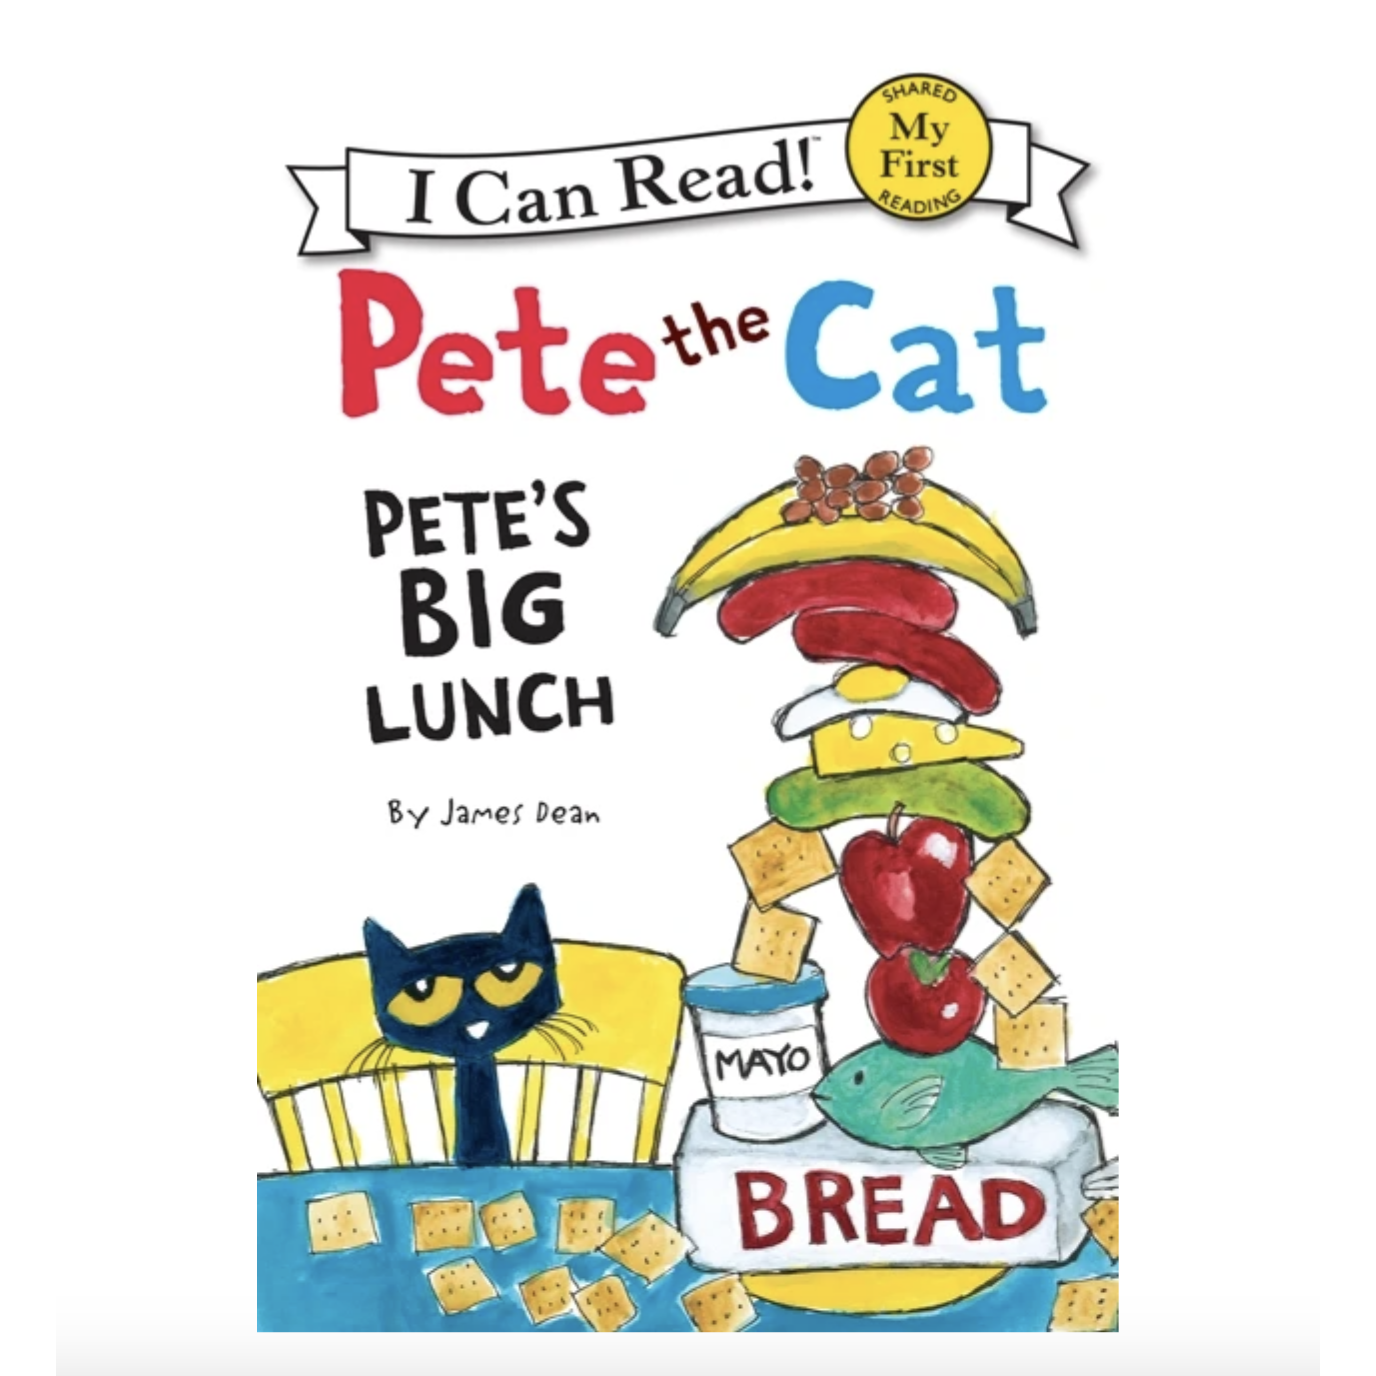 Harper Collins: My First I Can Read: Pete the Cat: Pete's Big Lunch-HARPER COLLINS PUBLISHERS-Little Giant Kidz